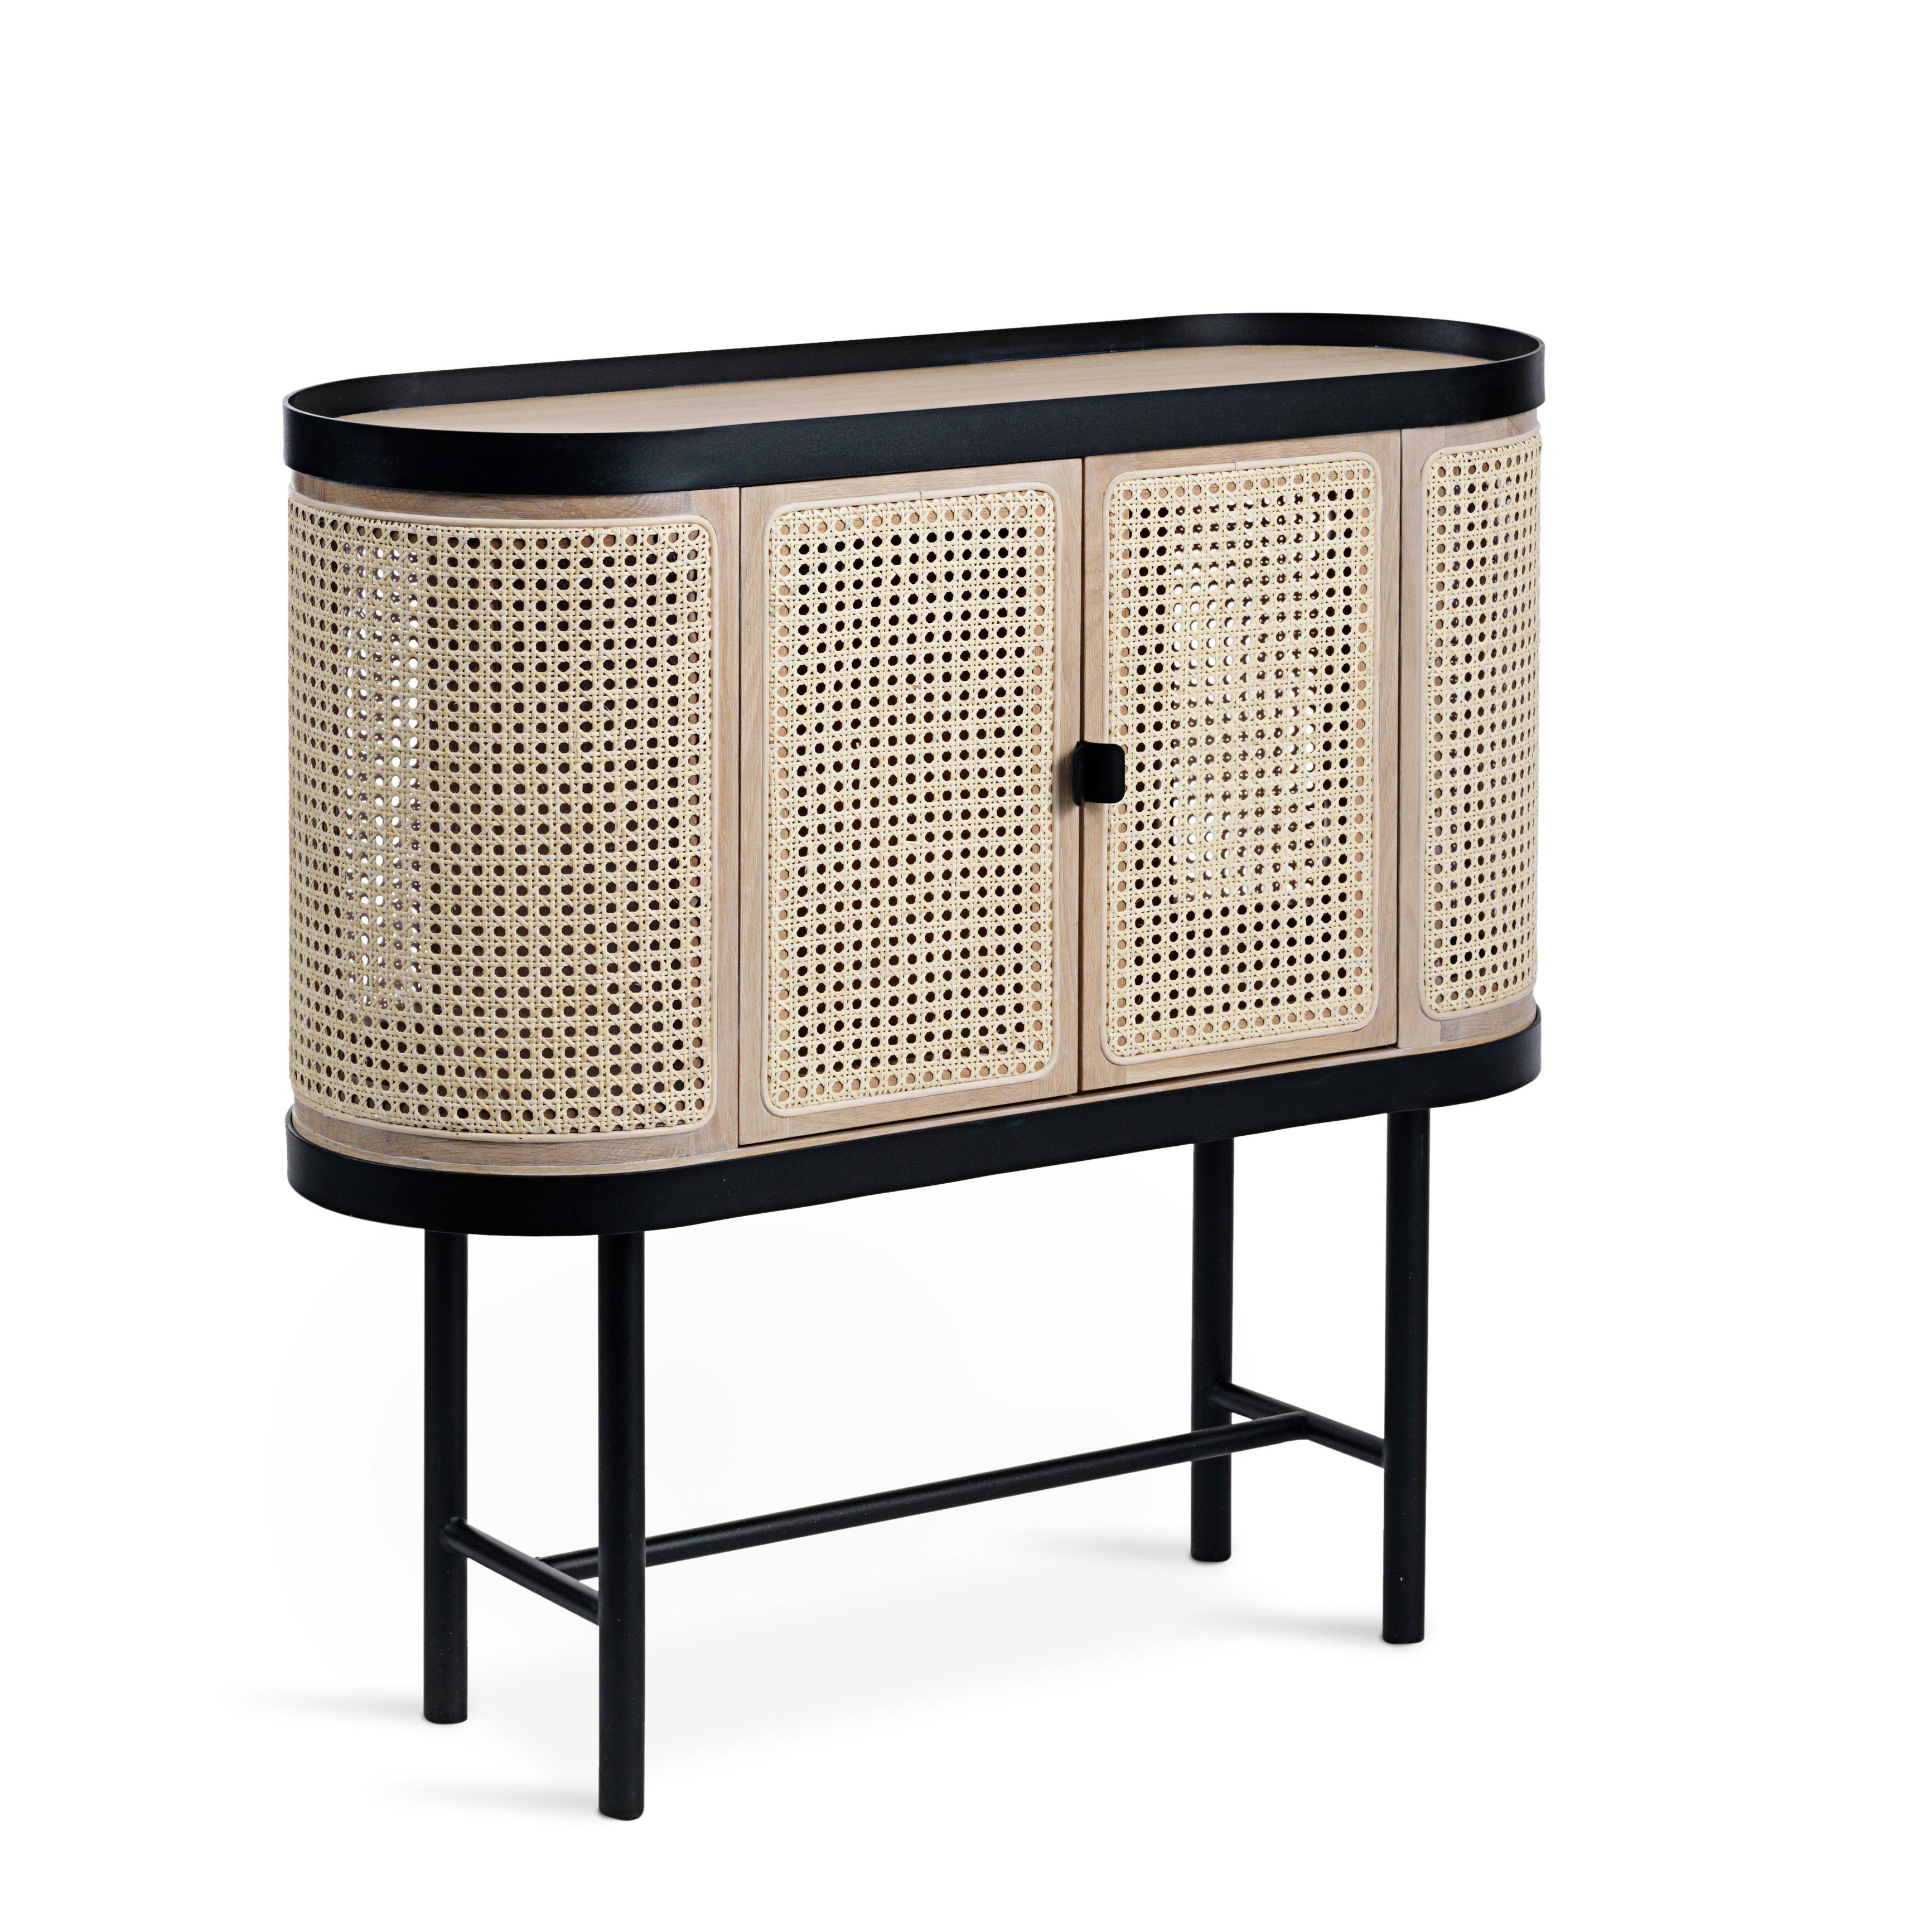 An elegant, spacious wood and wicker bar cabinet with a simple metal frame. It is an exquisite item of furniture, perfect for any connoisseur who fancies a stylish bar cabinet, or any design lover dreaming of a nice little cabinet for the living